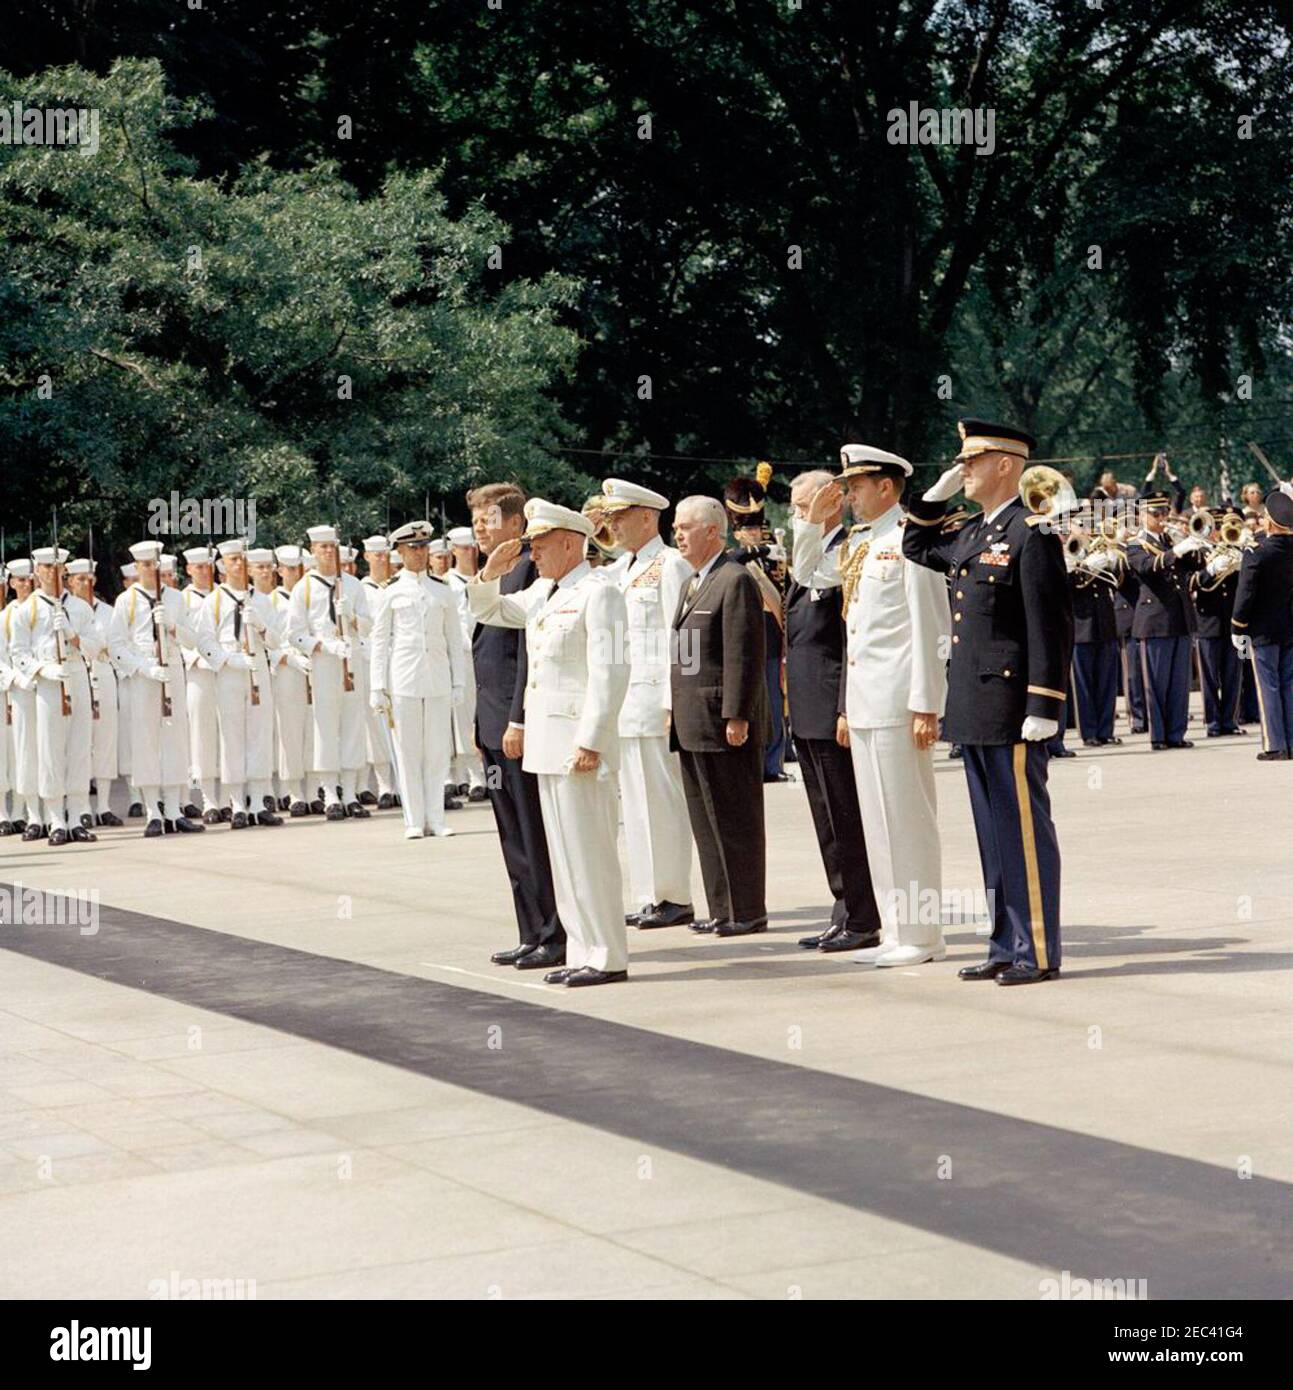 Memorial Day Ceremonies at Arlington National Cemetery, 10:50AM. President John F. Kennedy and others stand at attention in front of the Tomb of the Unknown Soldier, during Memorial Day ceremonies at Arlington National Cemetery in Arlington, Virginia. Left to right: President Kennedy; Commanding General of the Military District of Washington, Major General Paul A. Gavan; General Maxwell D. Taylor; Administrator of the Veterans Administration (VA), General John S. Gleason; former United States Ambassador to Ireland, Grant Stockdale; Naval Aide to the President, Captain Tazewell Shepard; unident Stock Photo